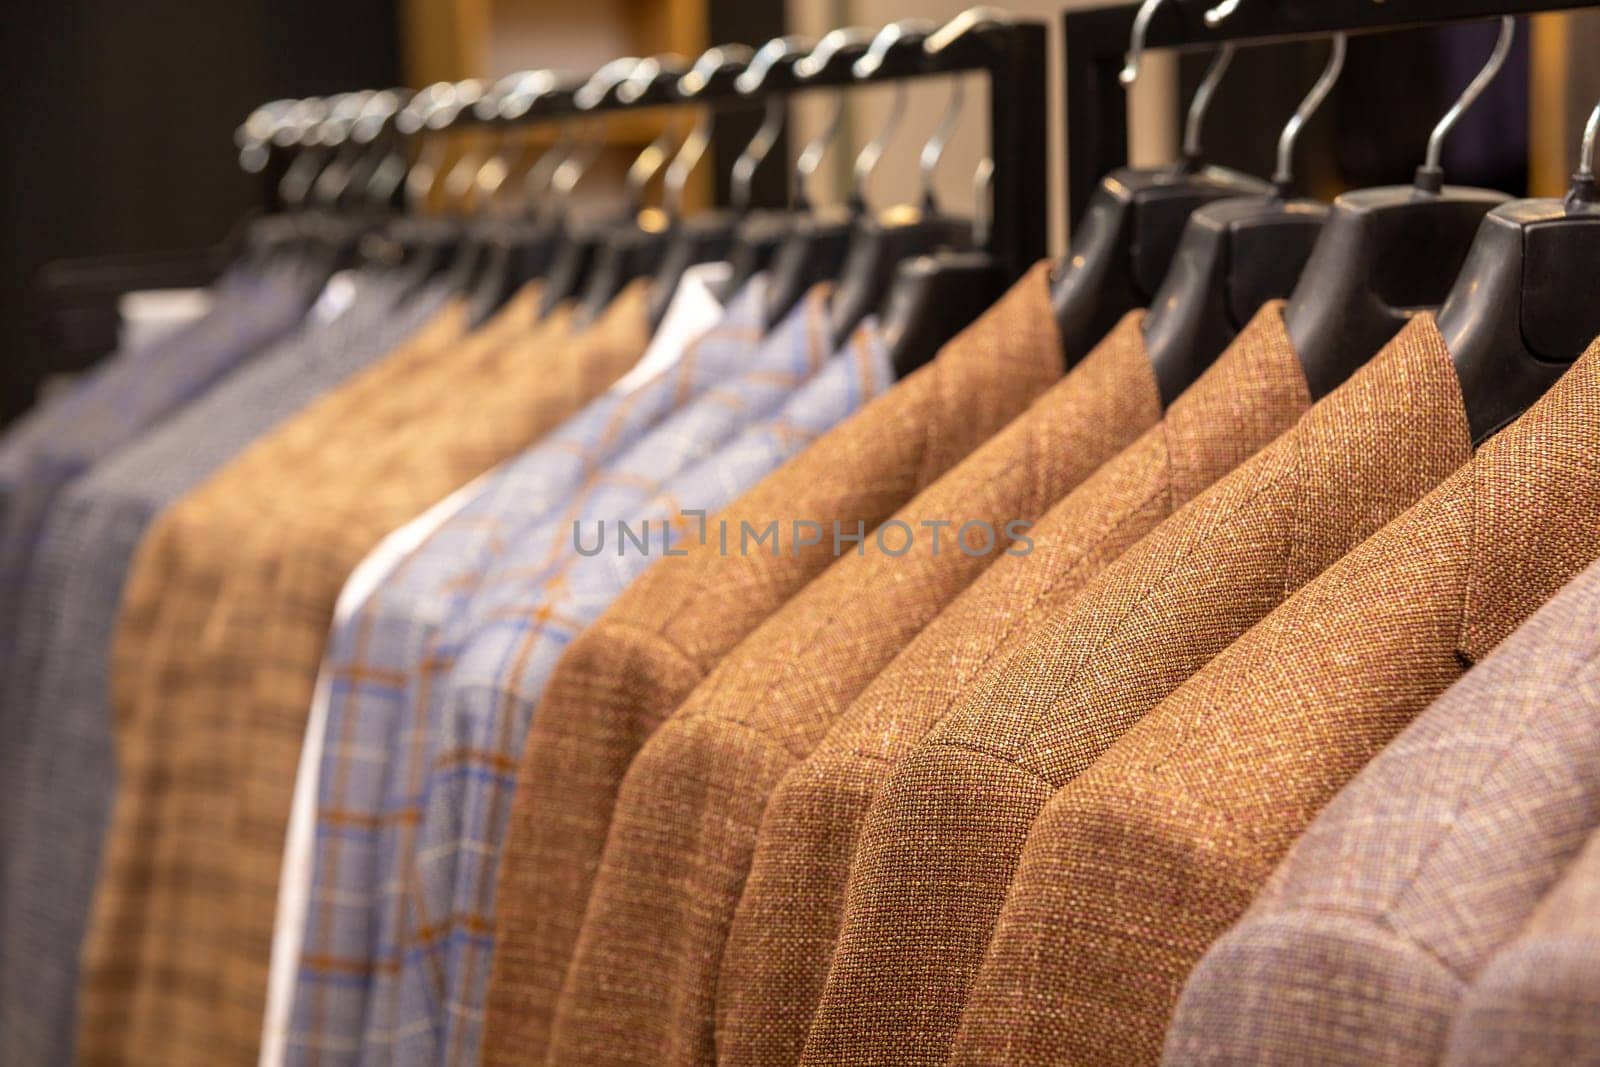 A row of men's suits, jackets hanging on a rack for display. by BY-_-BY